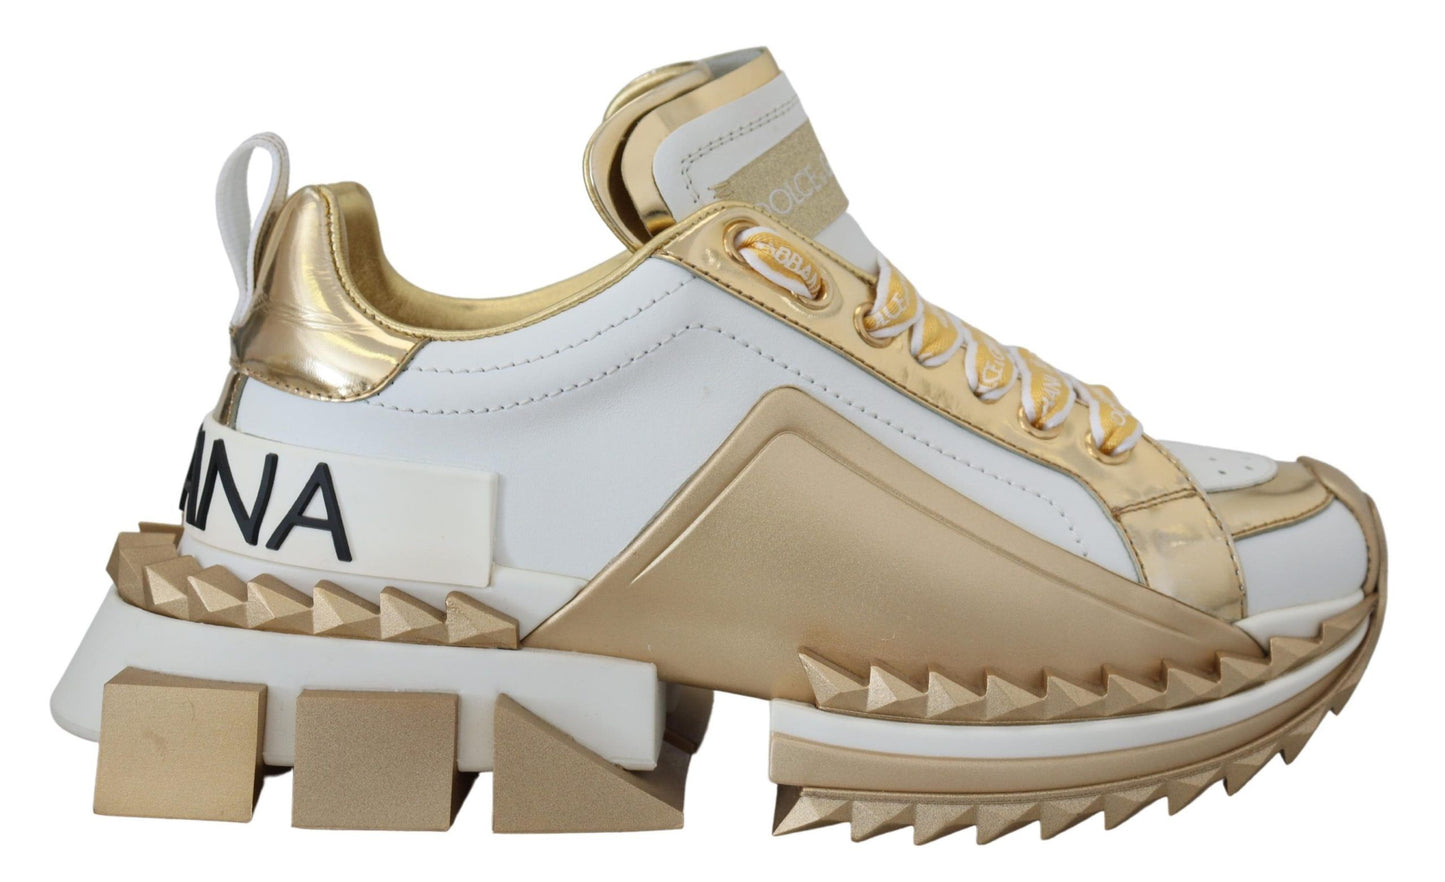 Dolce & Gabbana White and gold Super Queen Leather Shoes